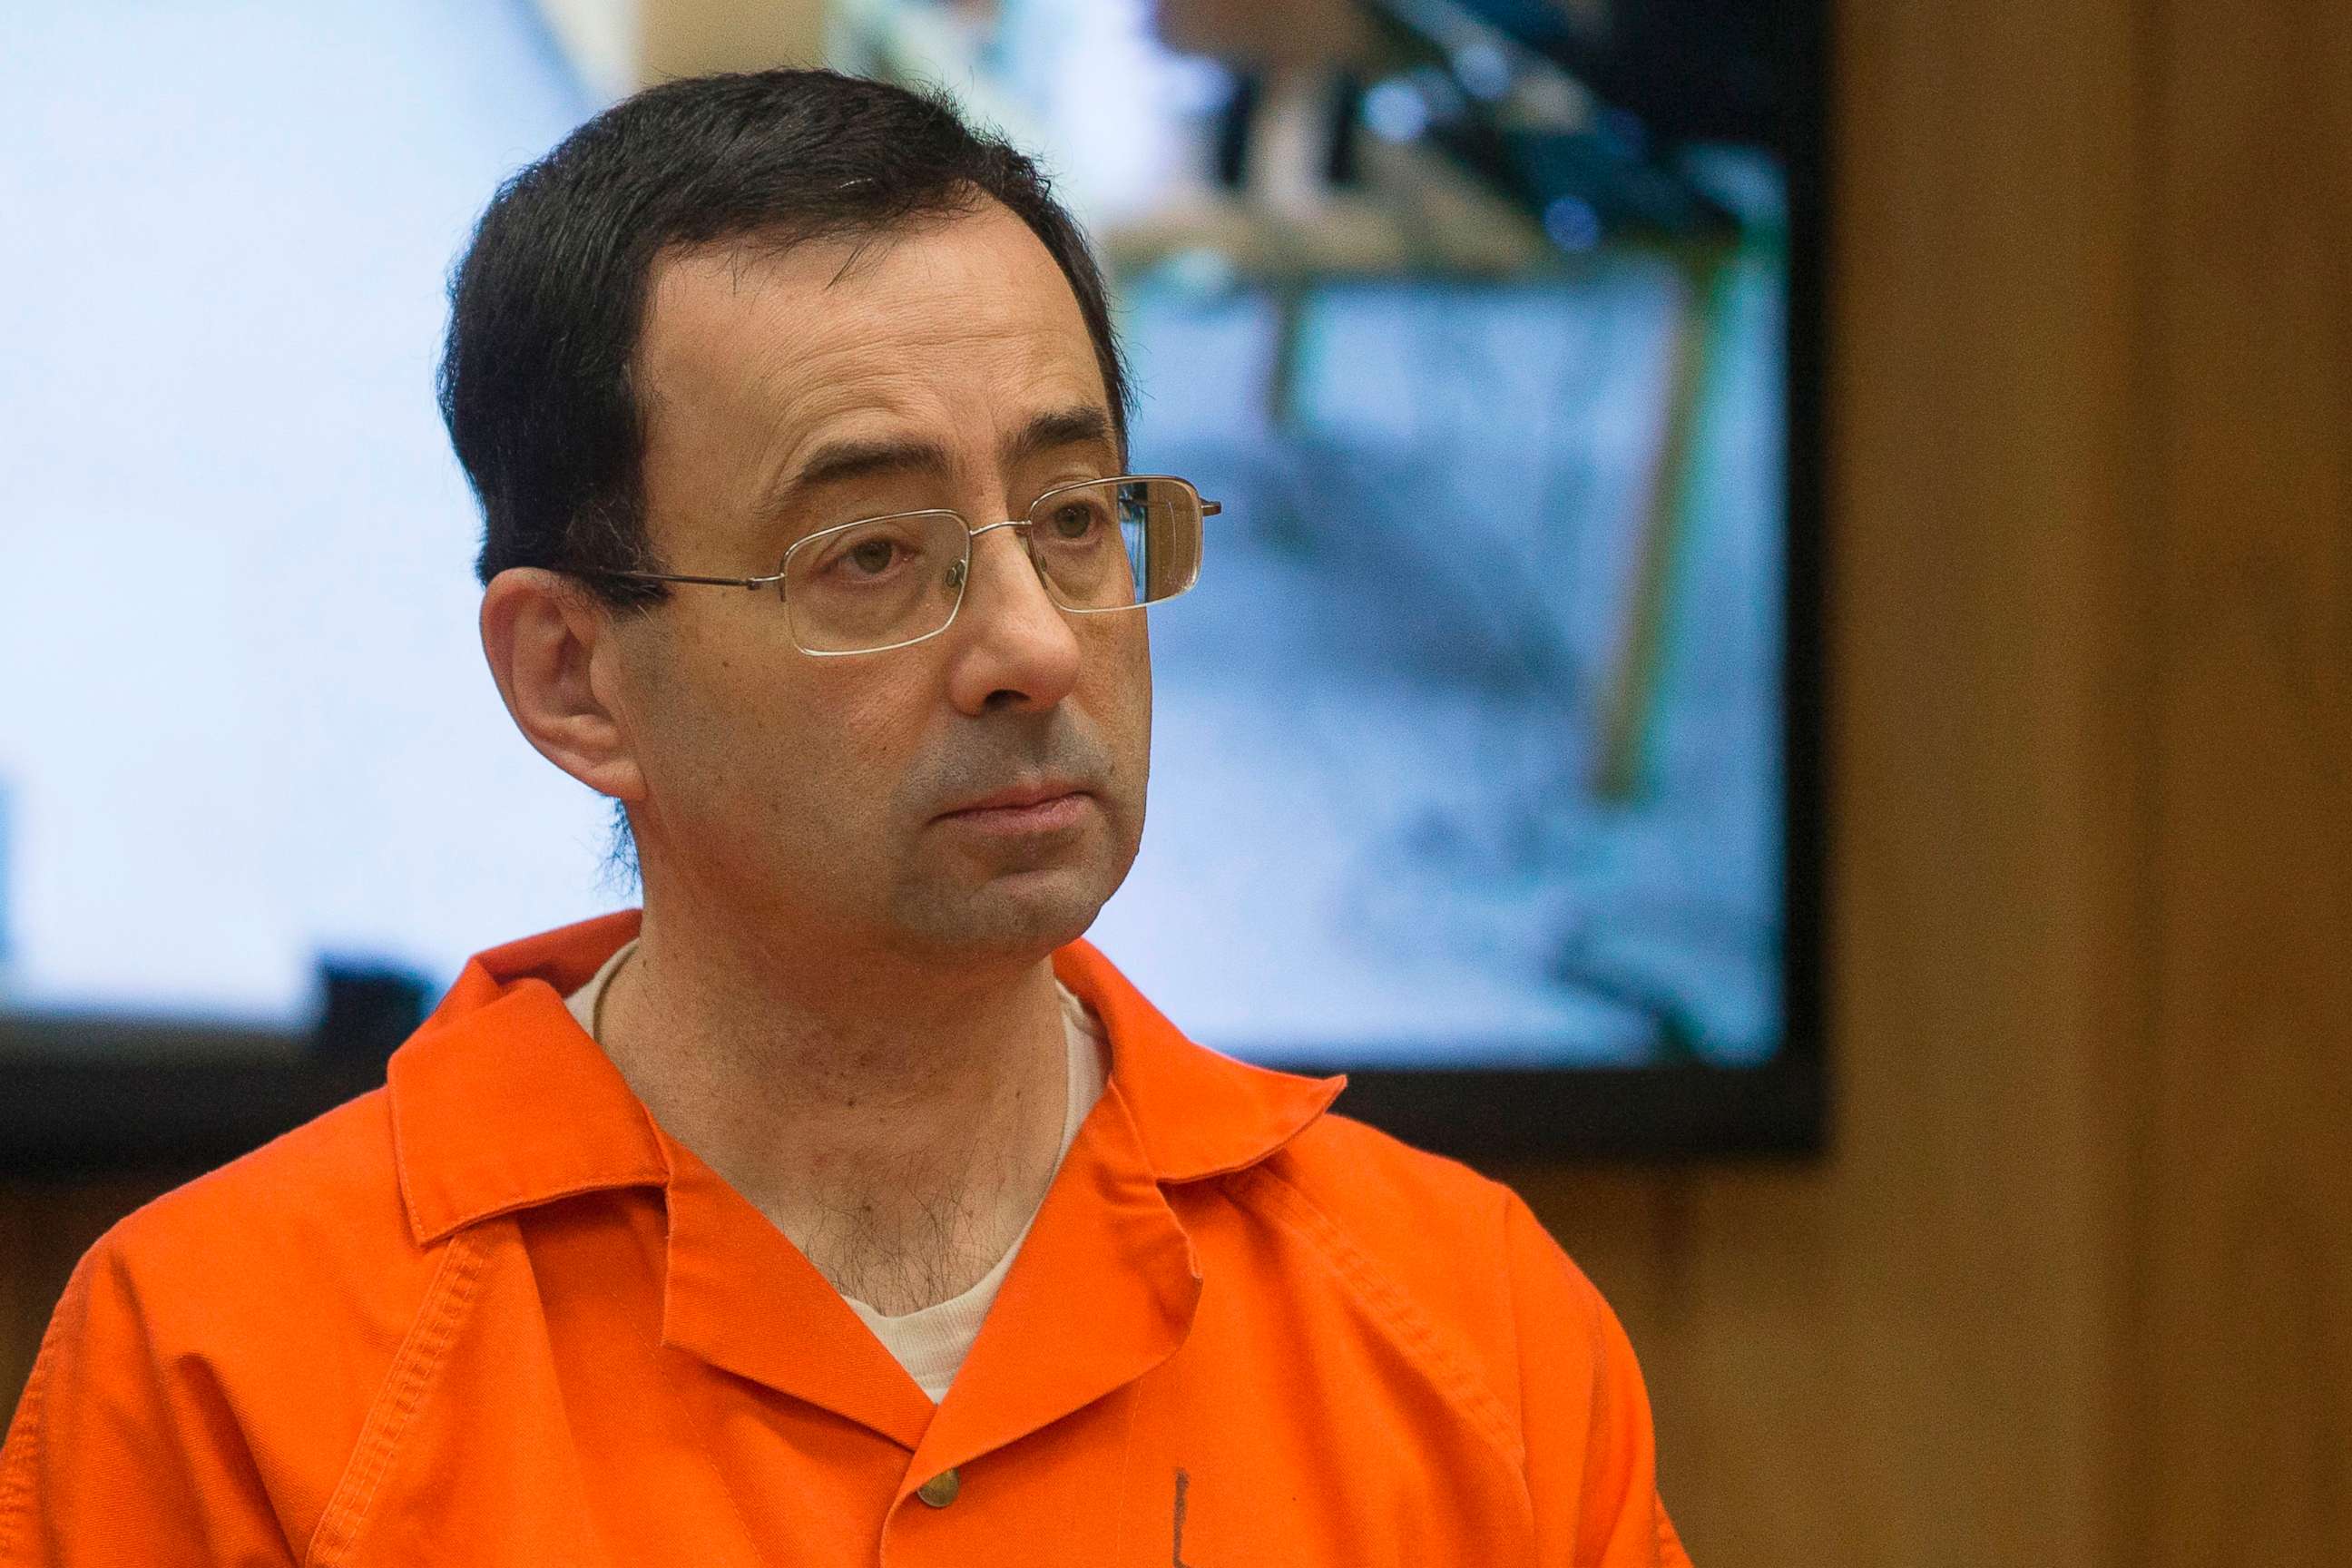 PHOTO: Former Michigan State University and USA Gymnastics doctor Larry Nassar appears in court for his final sentencing phase in Eaton County Circuit Court, Feb. 5, 2018 in Charlotte, Mich.